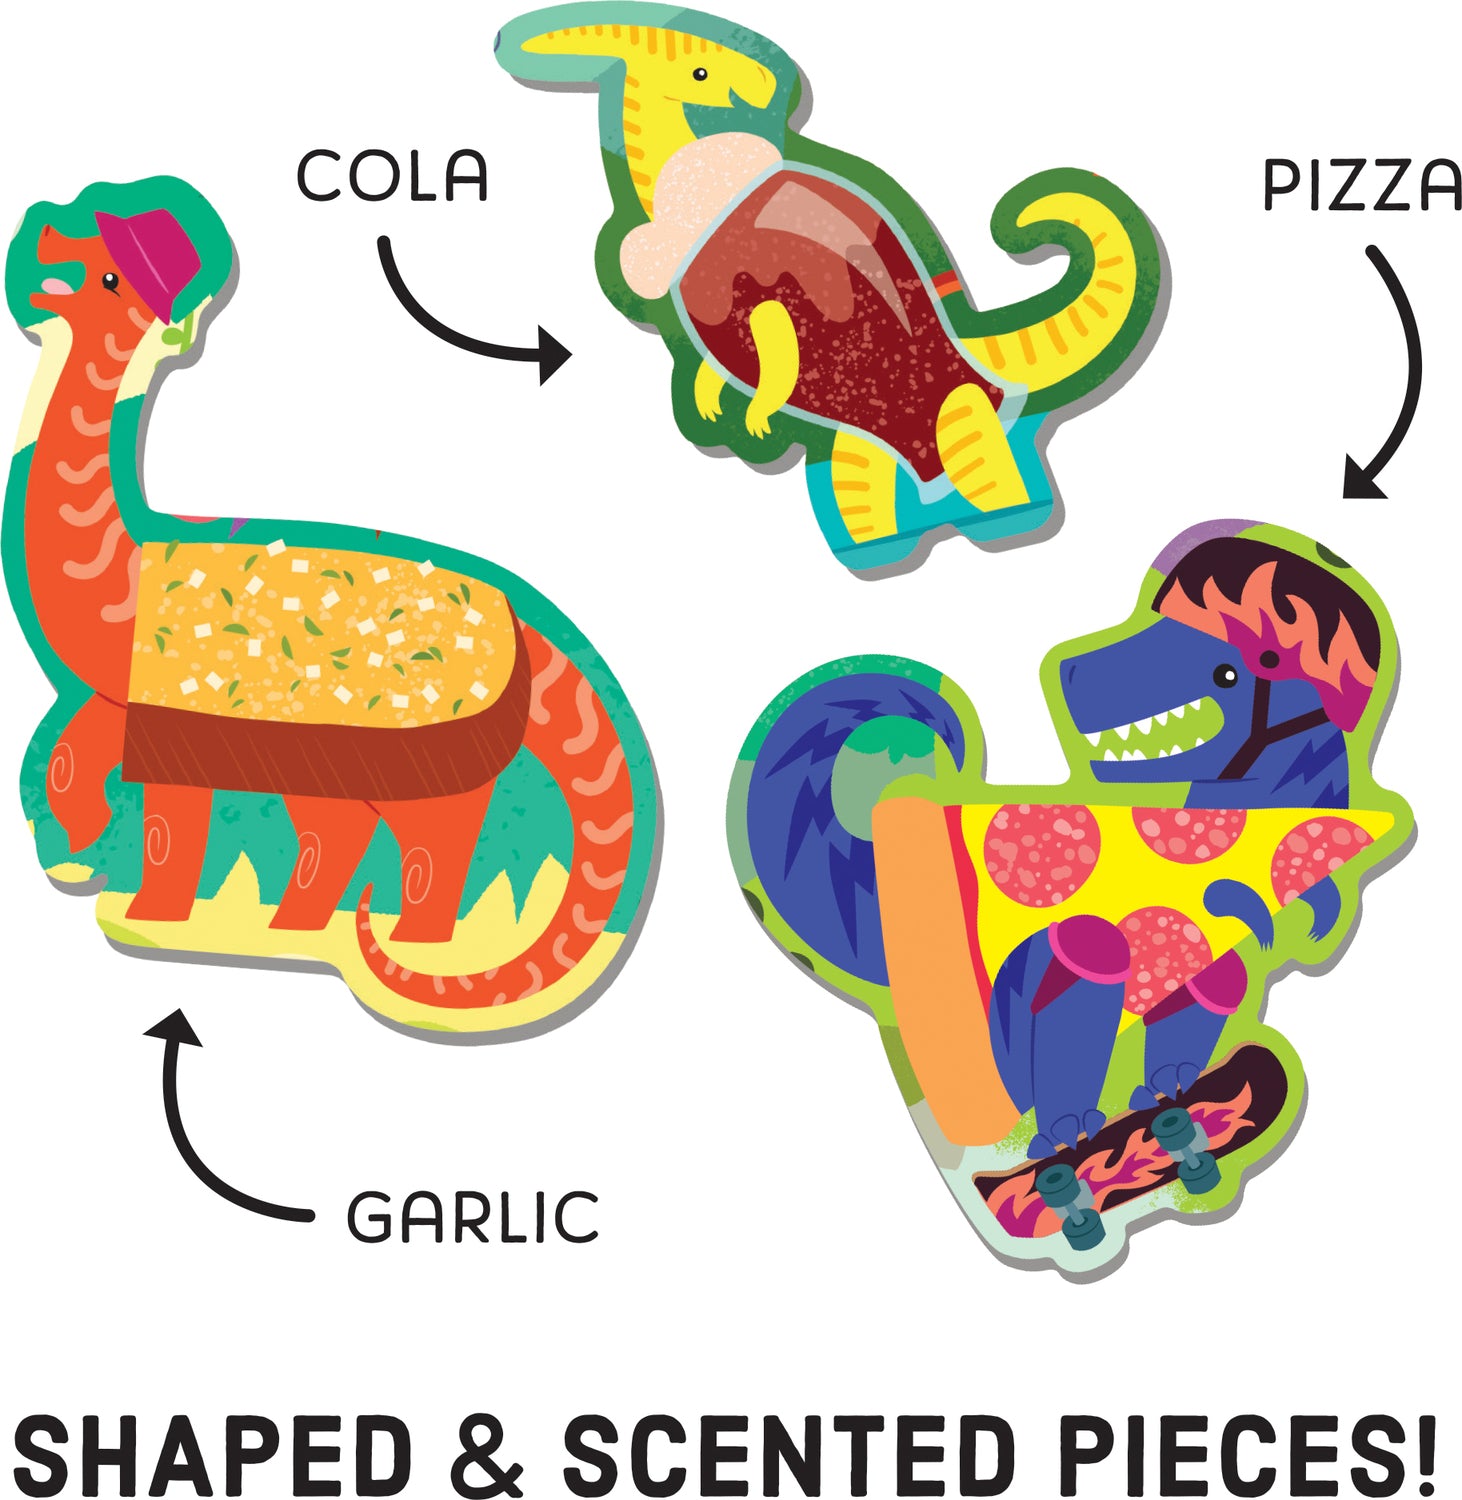 Scratch and Sniff Pizzasaurus